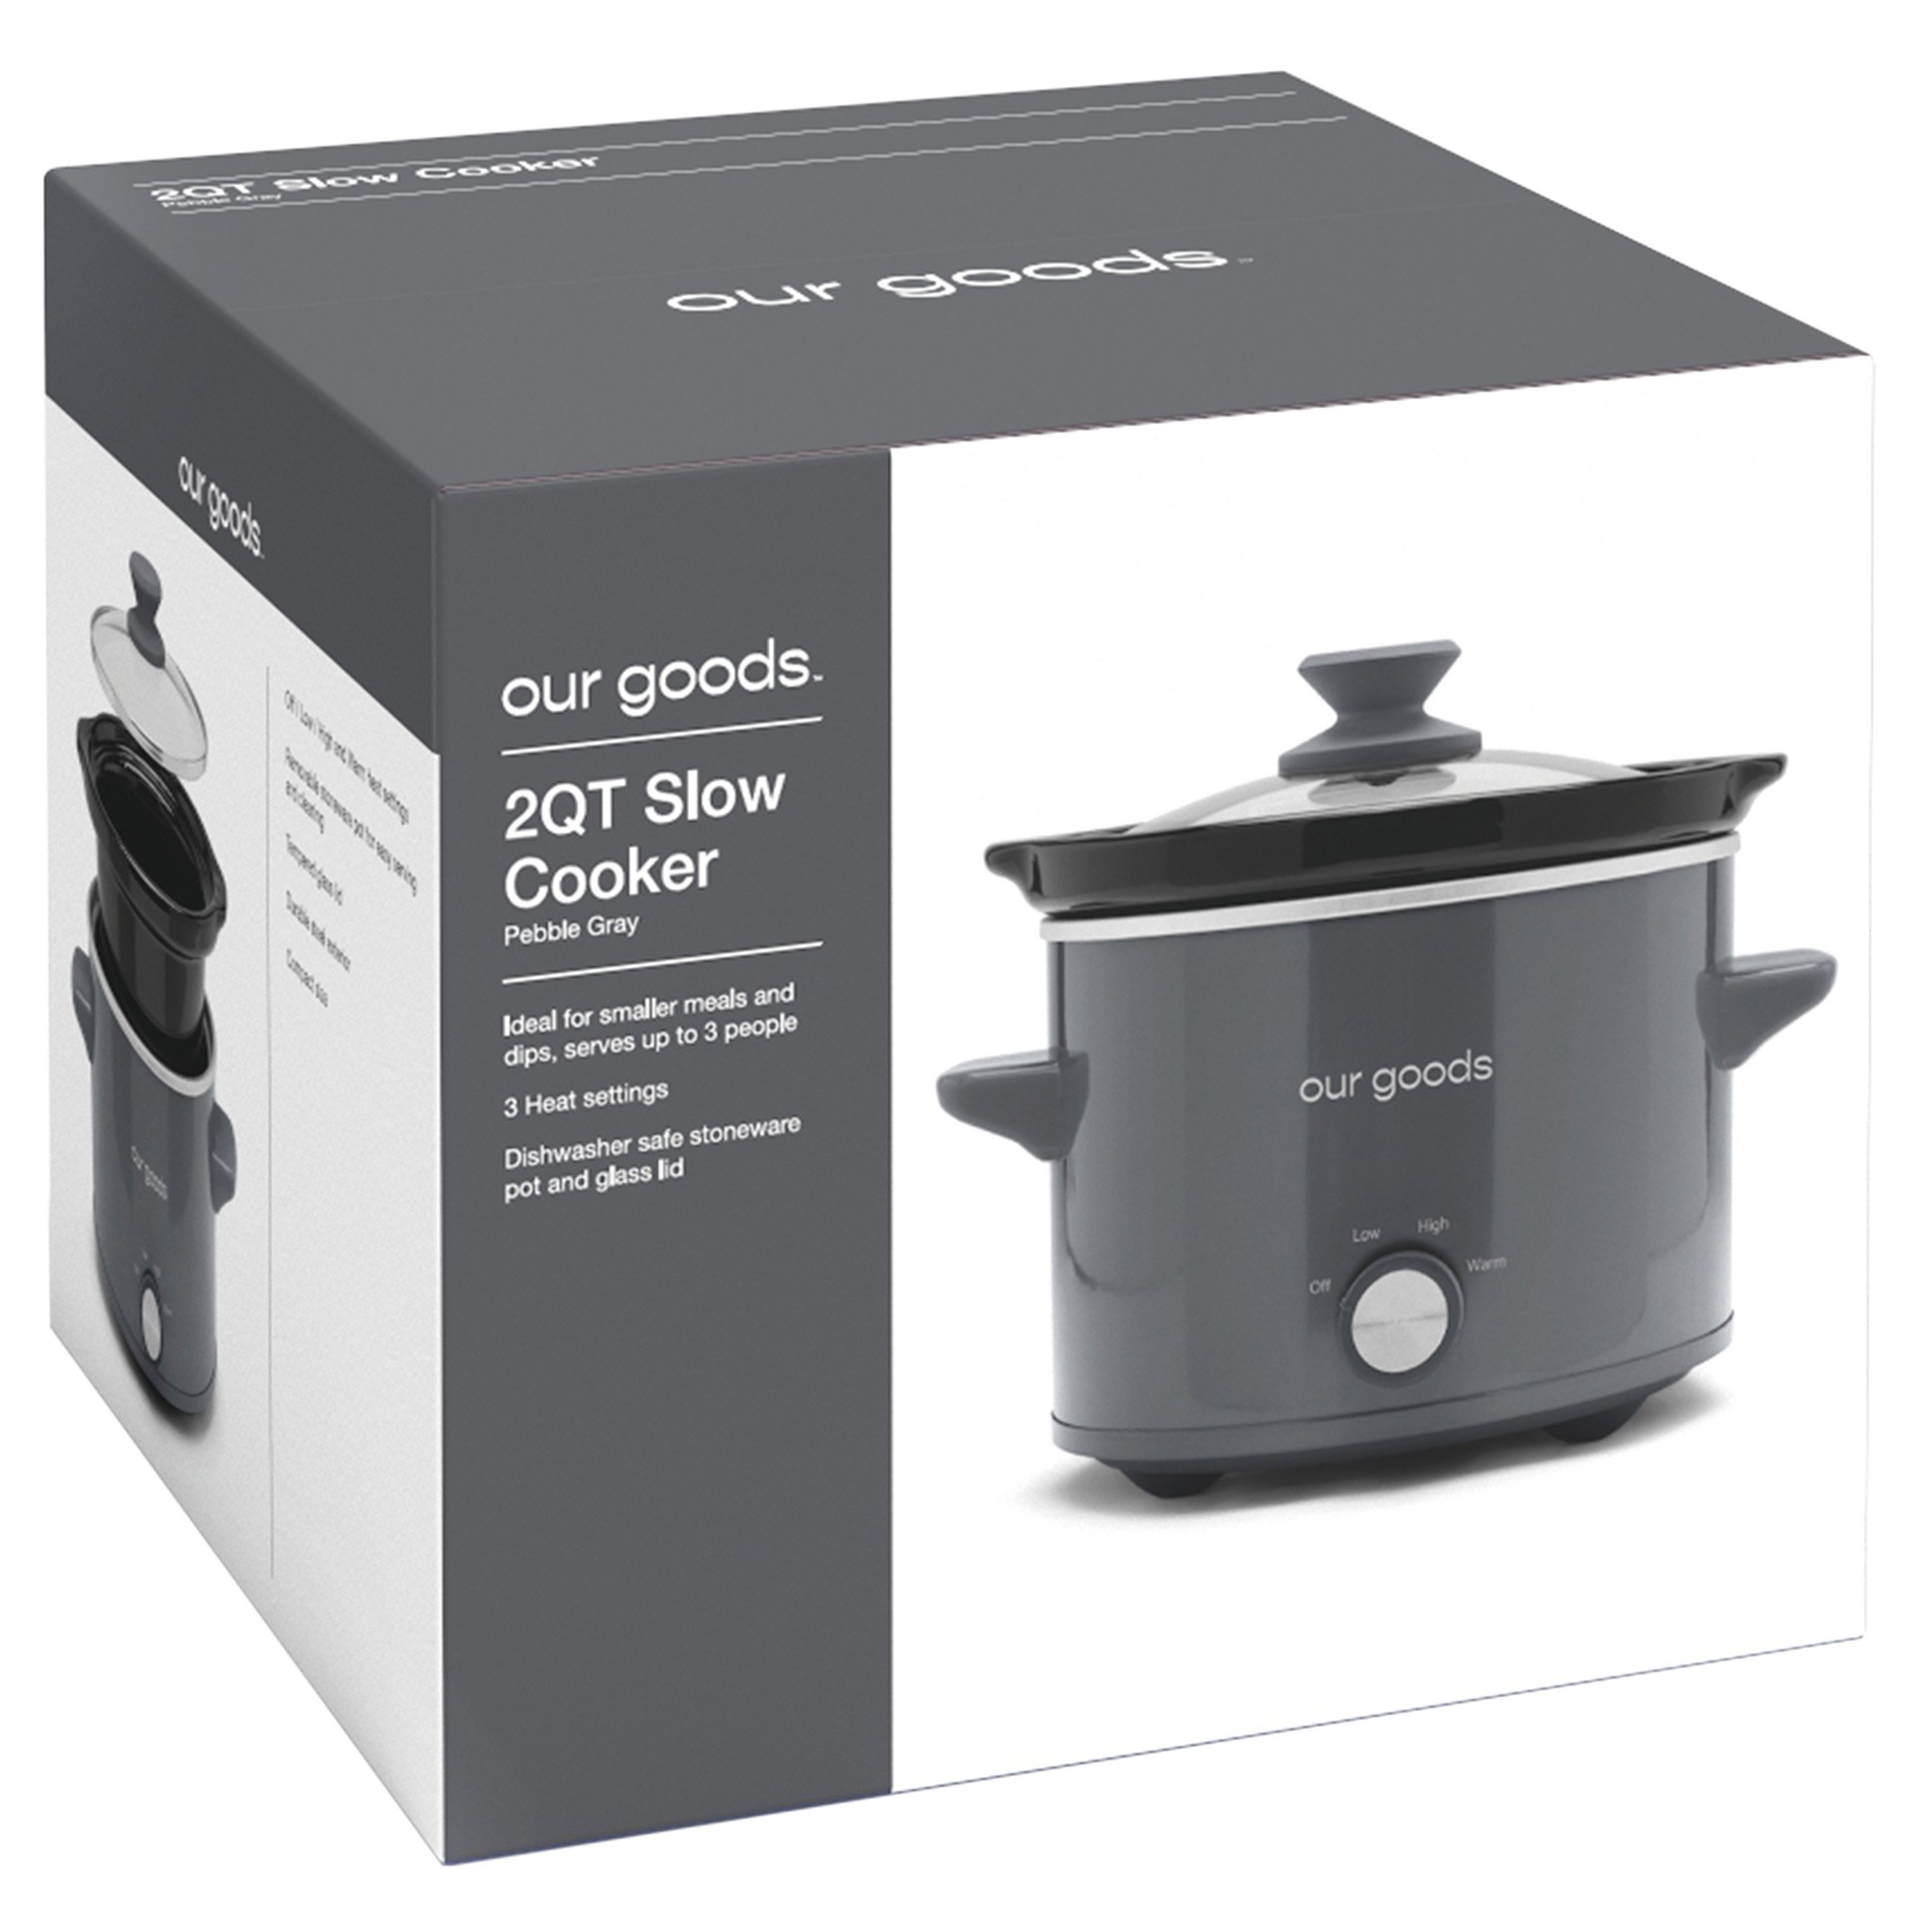 Blue Ridge Hospice Thrift Shop - SALE! Rival Crock-Pot Little Dipper SALE!-  This slow cooker is in perfect condition. It has a stainless steel finish  with black accents and lid (not glass).